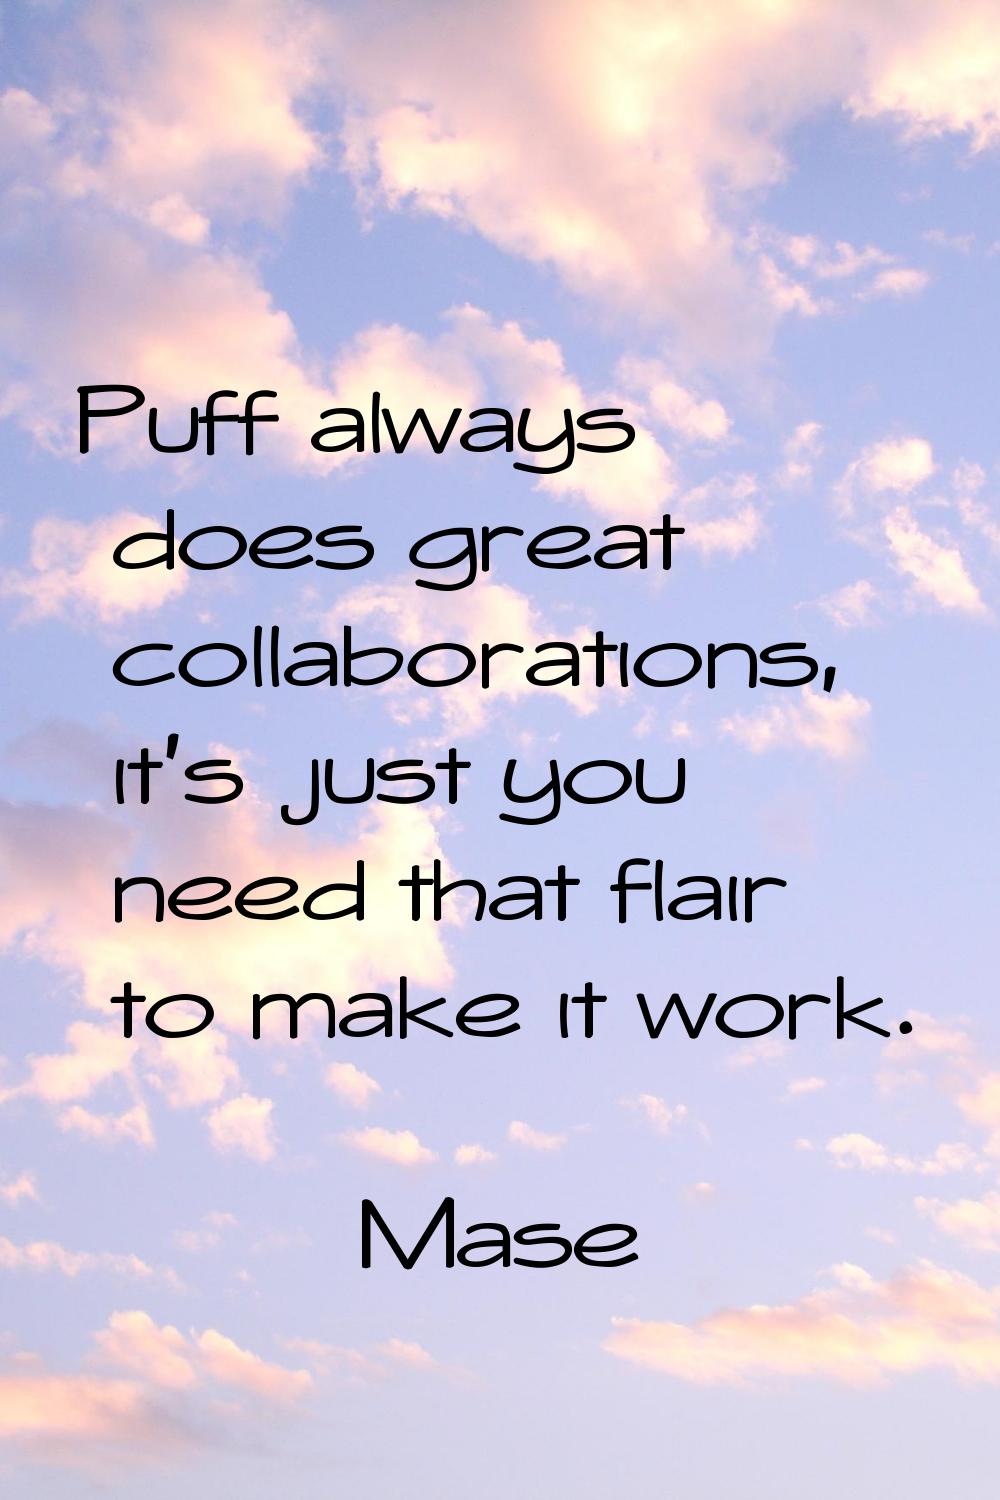 Puff always does great collaborations, it's just you need that flair to make it work.